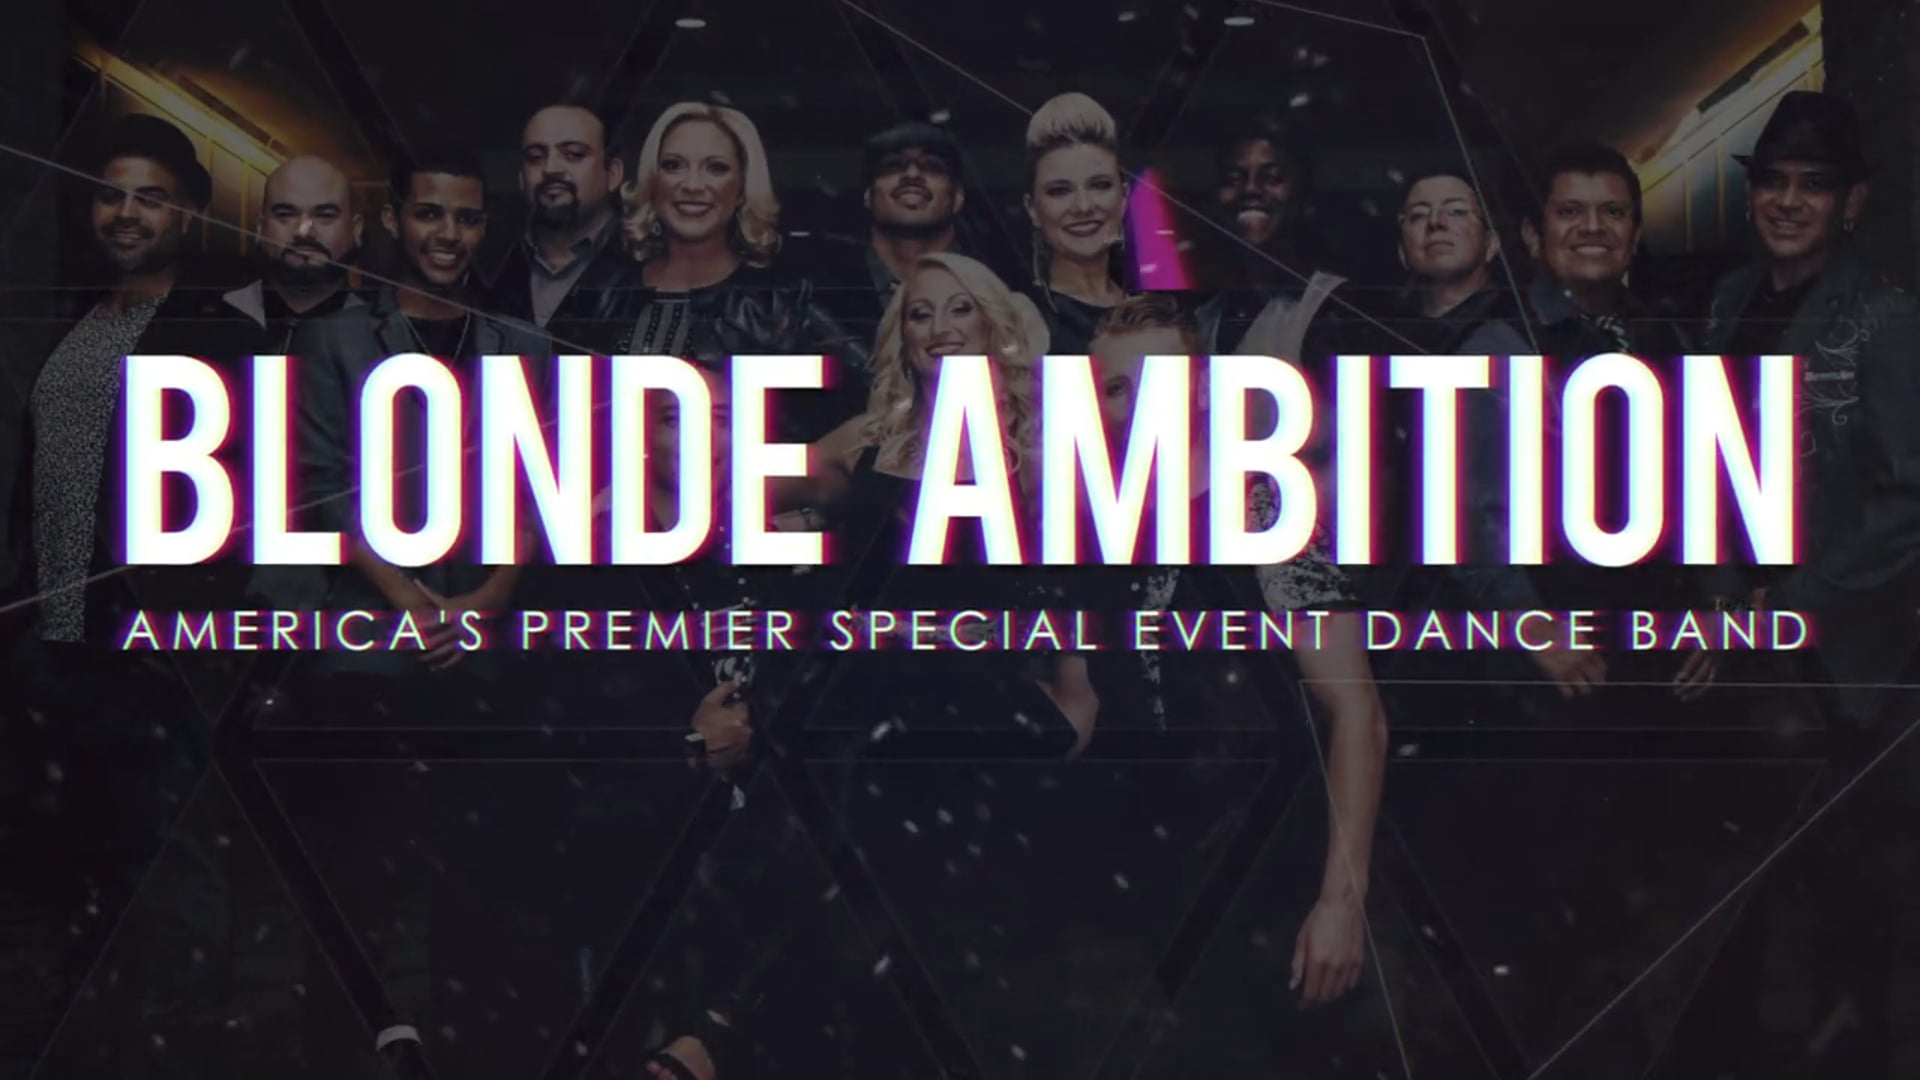 BLONDE AMBITION BAND OFFICIAL PROMO VIDEO